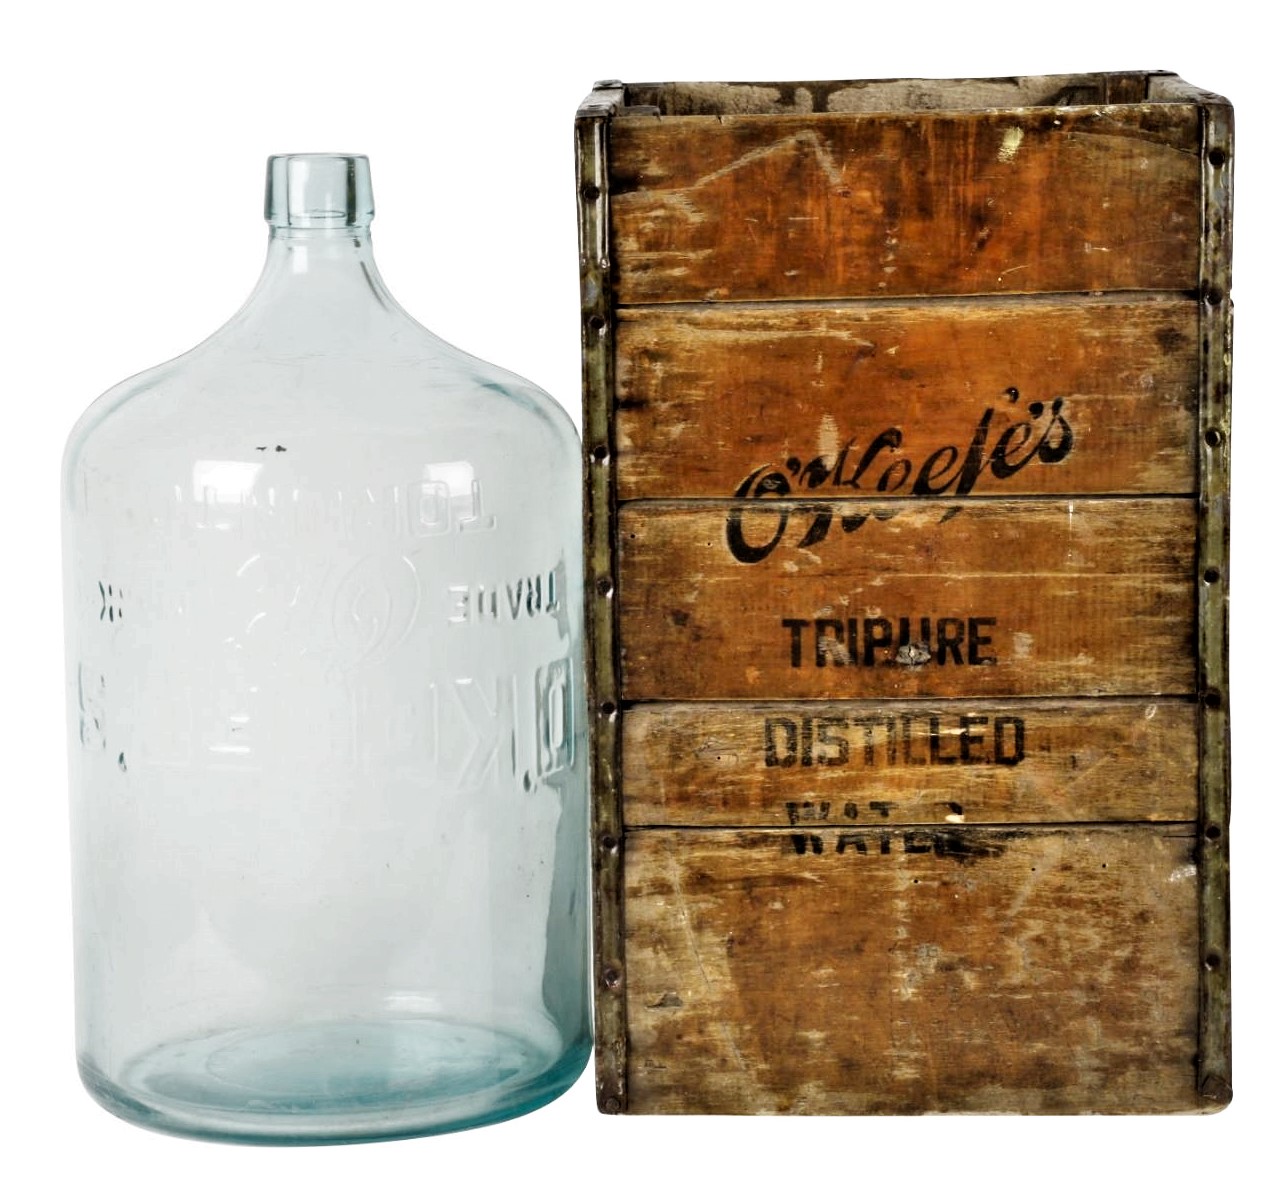 O'Keefe's Water Bottle and Crate.jpg